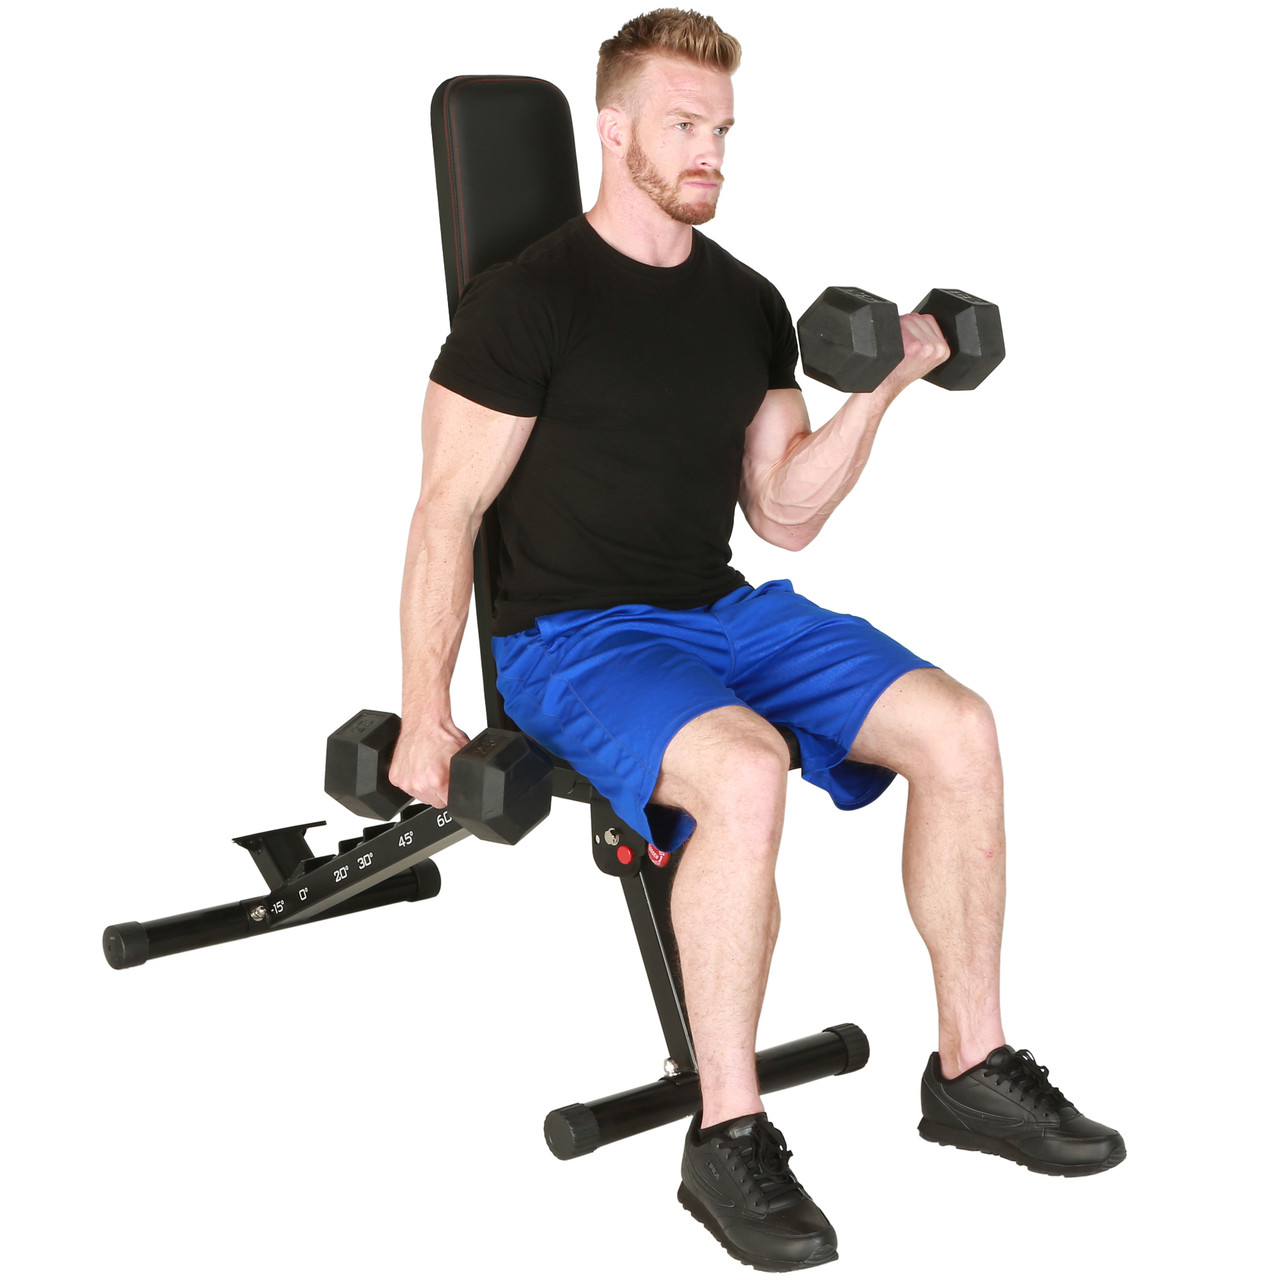 FITNESS REALITY 2000 Super Max XL High Capacity Weight Bench with  Detachable Leg Lock-Down